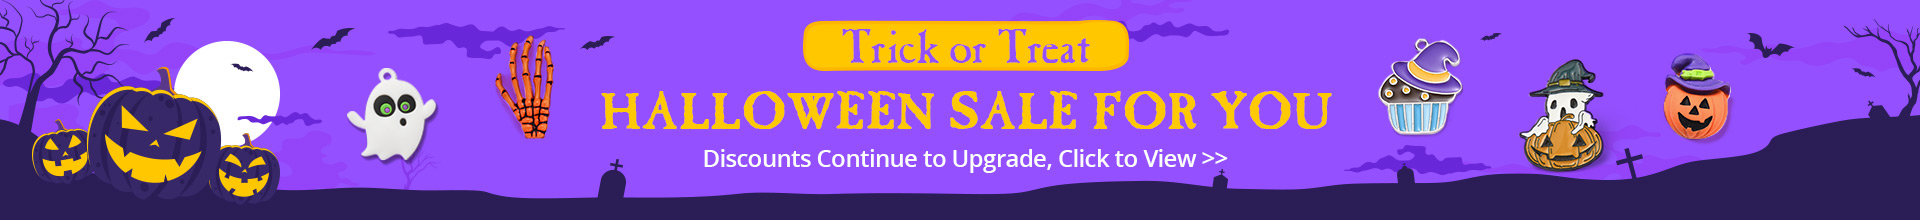 HALLOWEEN SALE FOR YOU